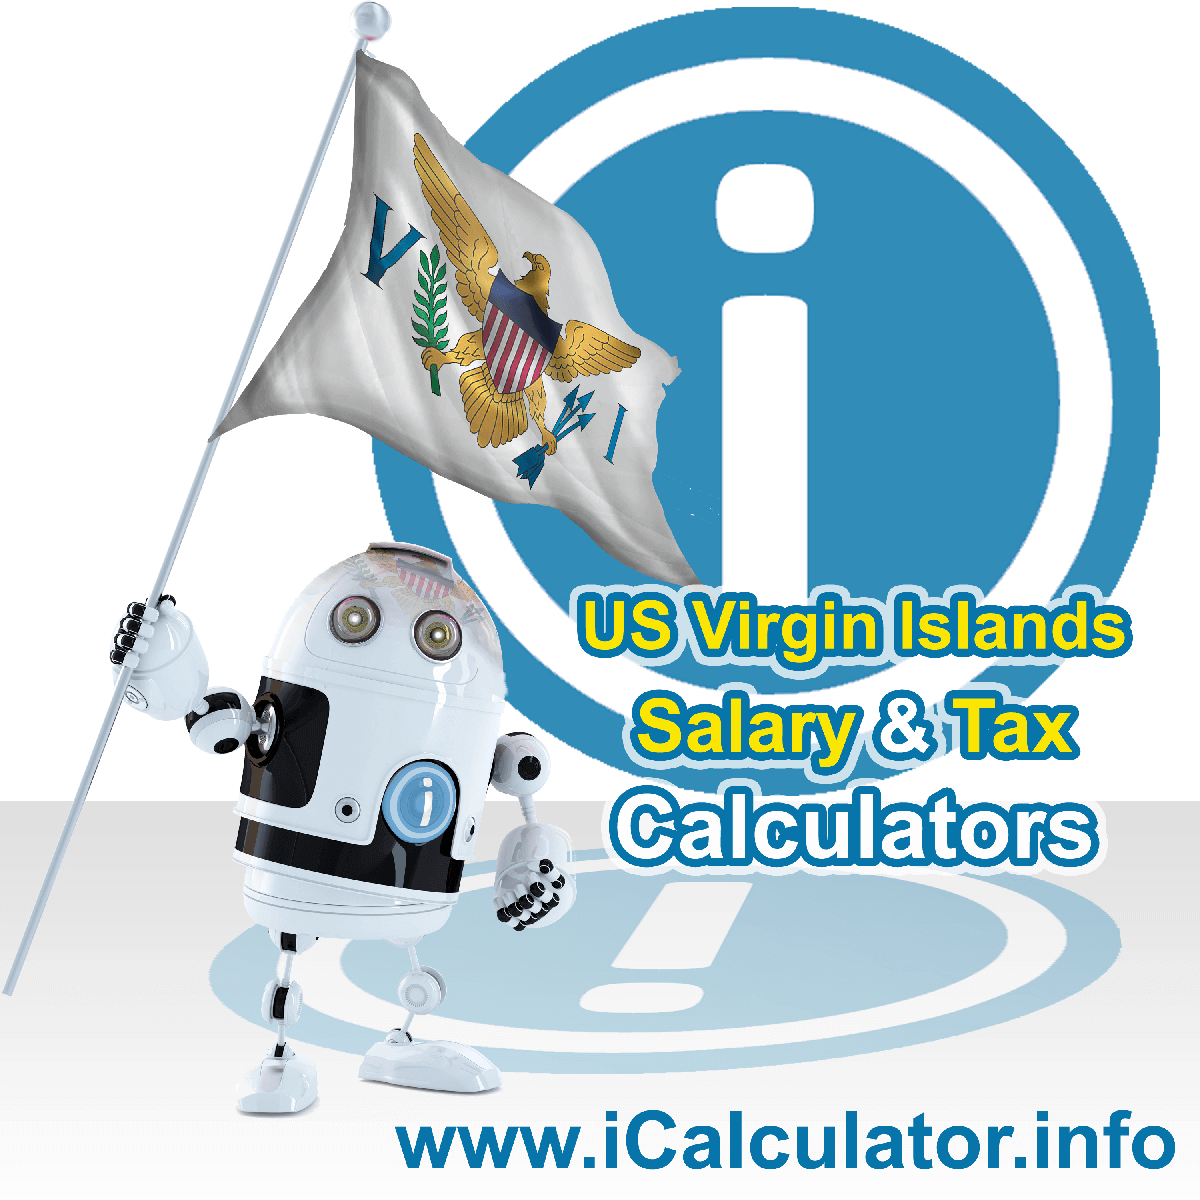 Us Virgin Islands Tax Calculator. This image shows the Us Virgin Islands flag and information relating to the tax formula for the Us Virgin Islands Salary Calculator